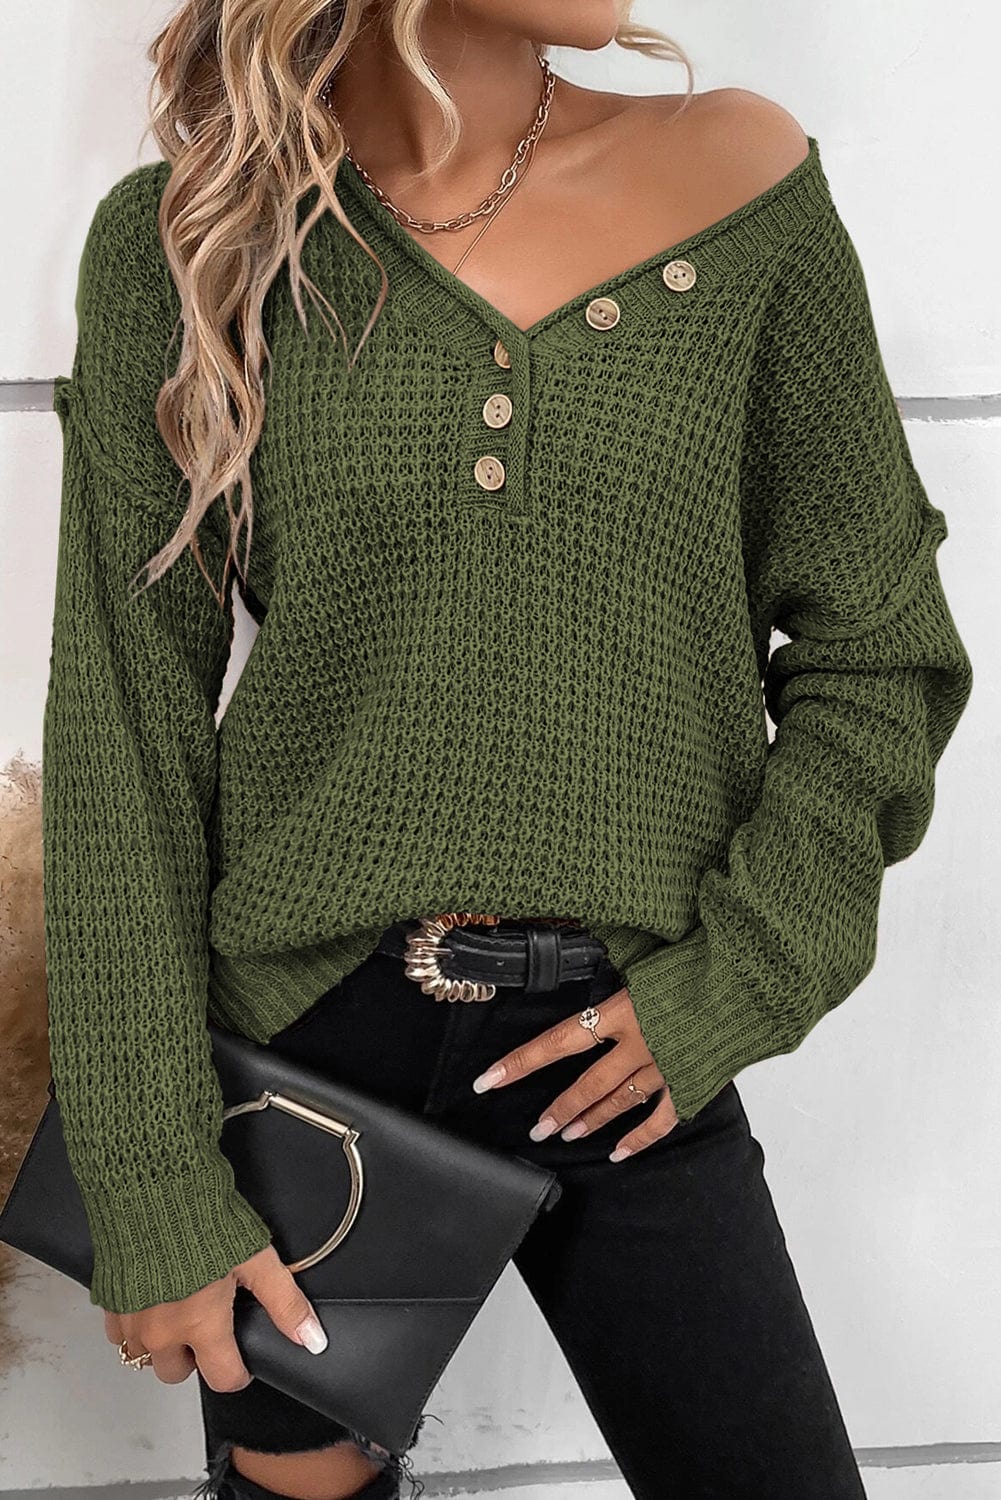 The802Gypsy  shirts and tops Pickle Green / S / 55%Acrylic+45%Cotton TRAVELING GYPSY-Casual Knit Top